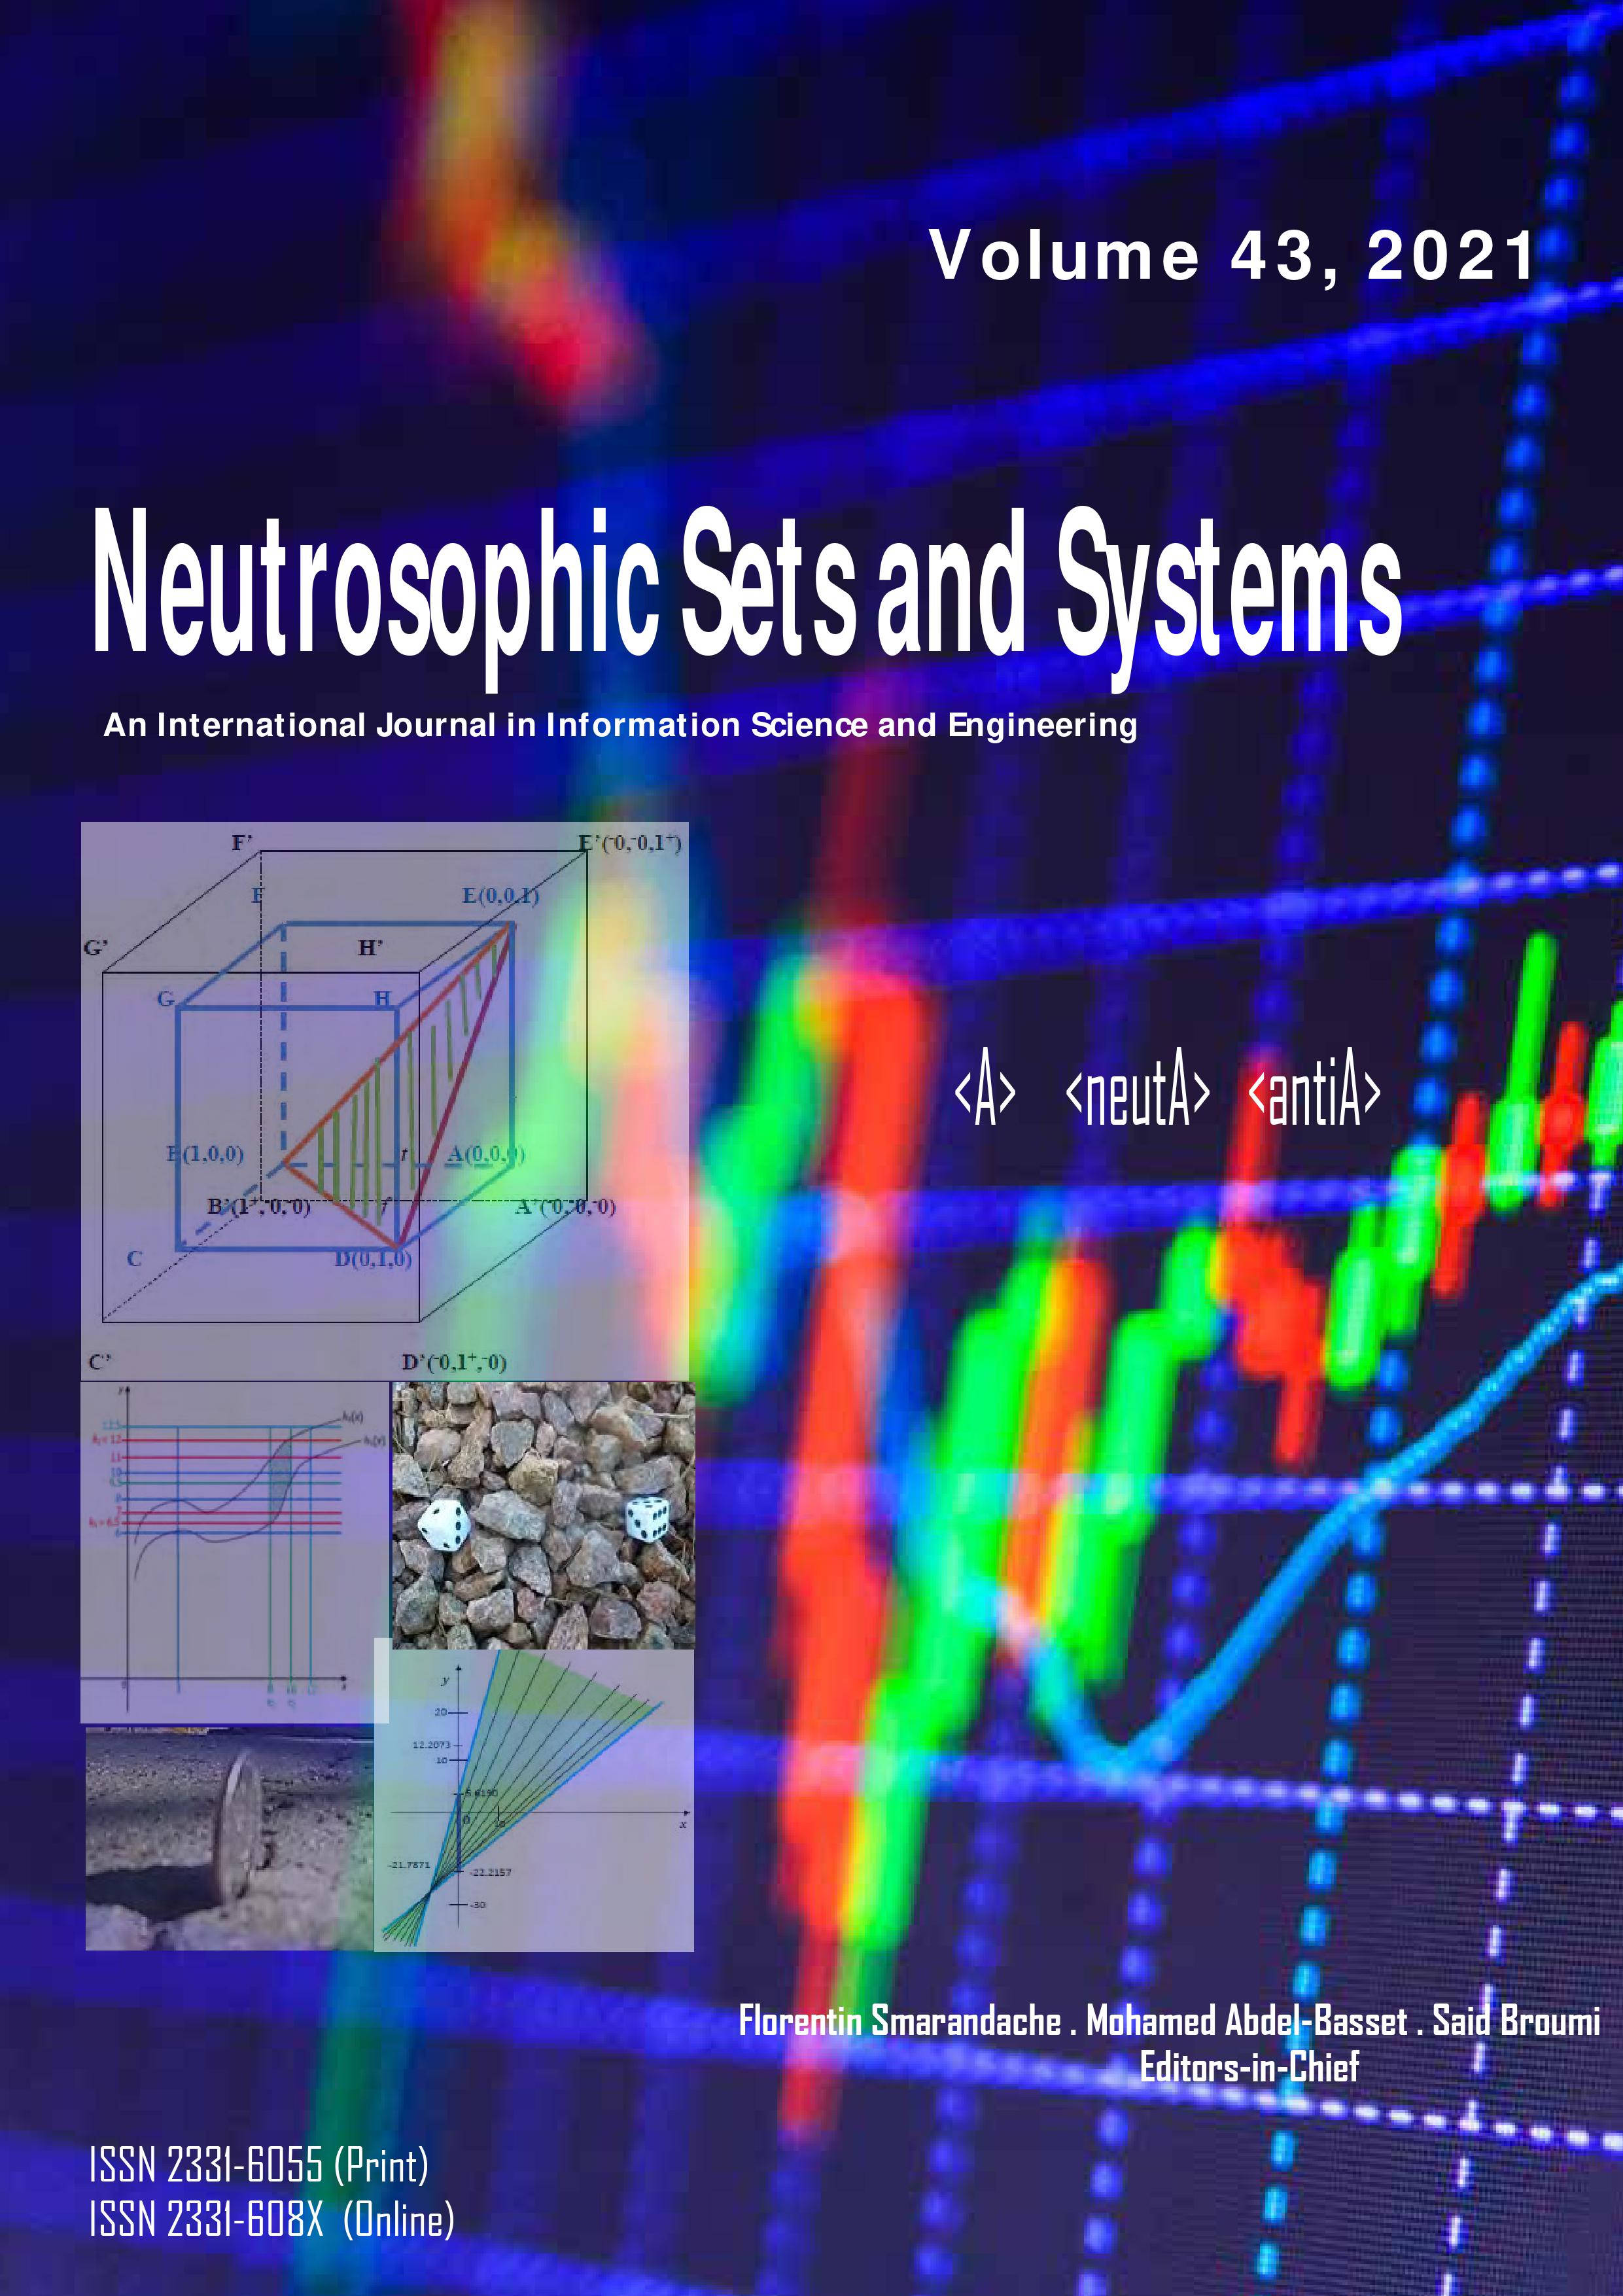 					View Vol. 43 (2021): Neutrosophic Sets and Systems 
				